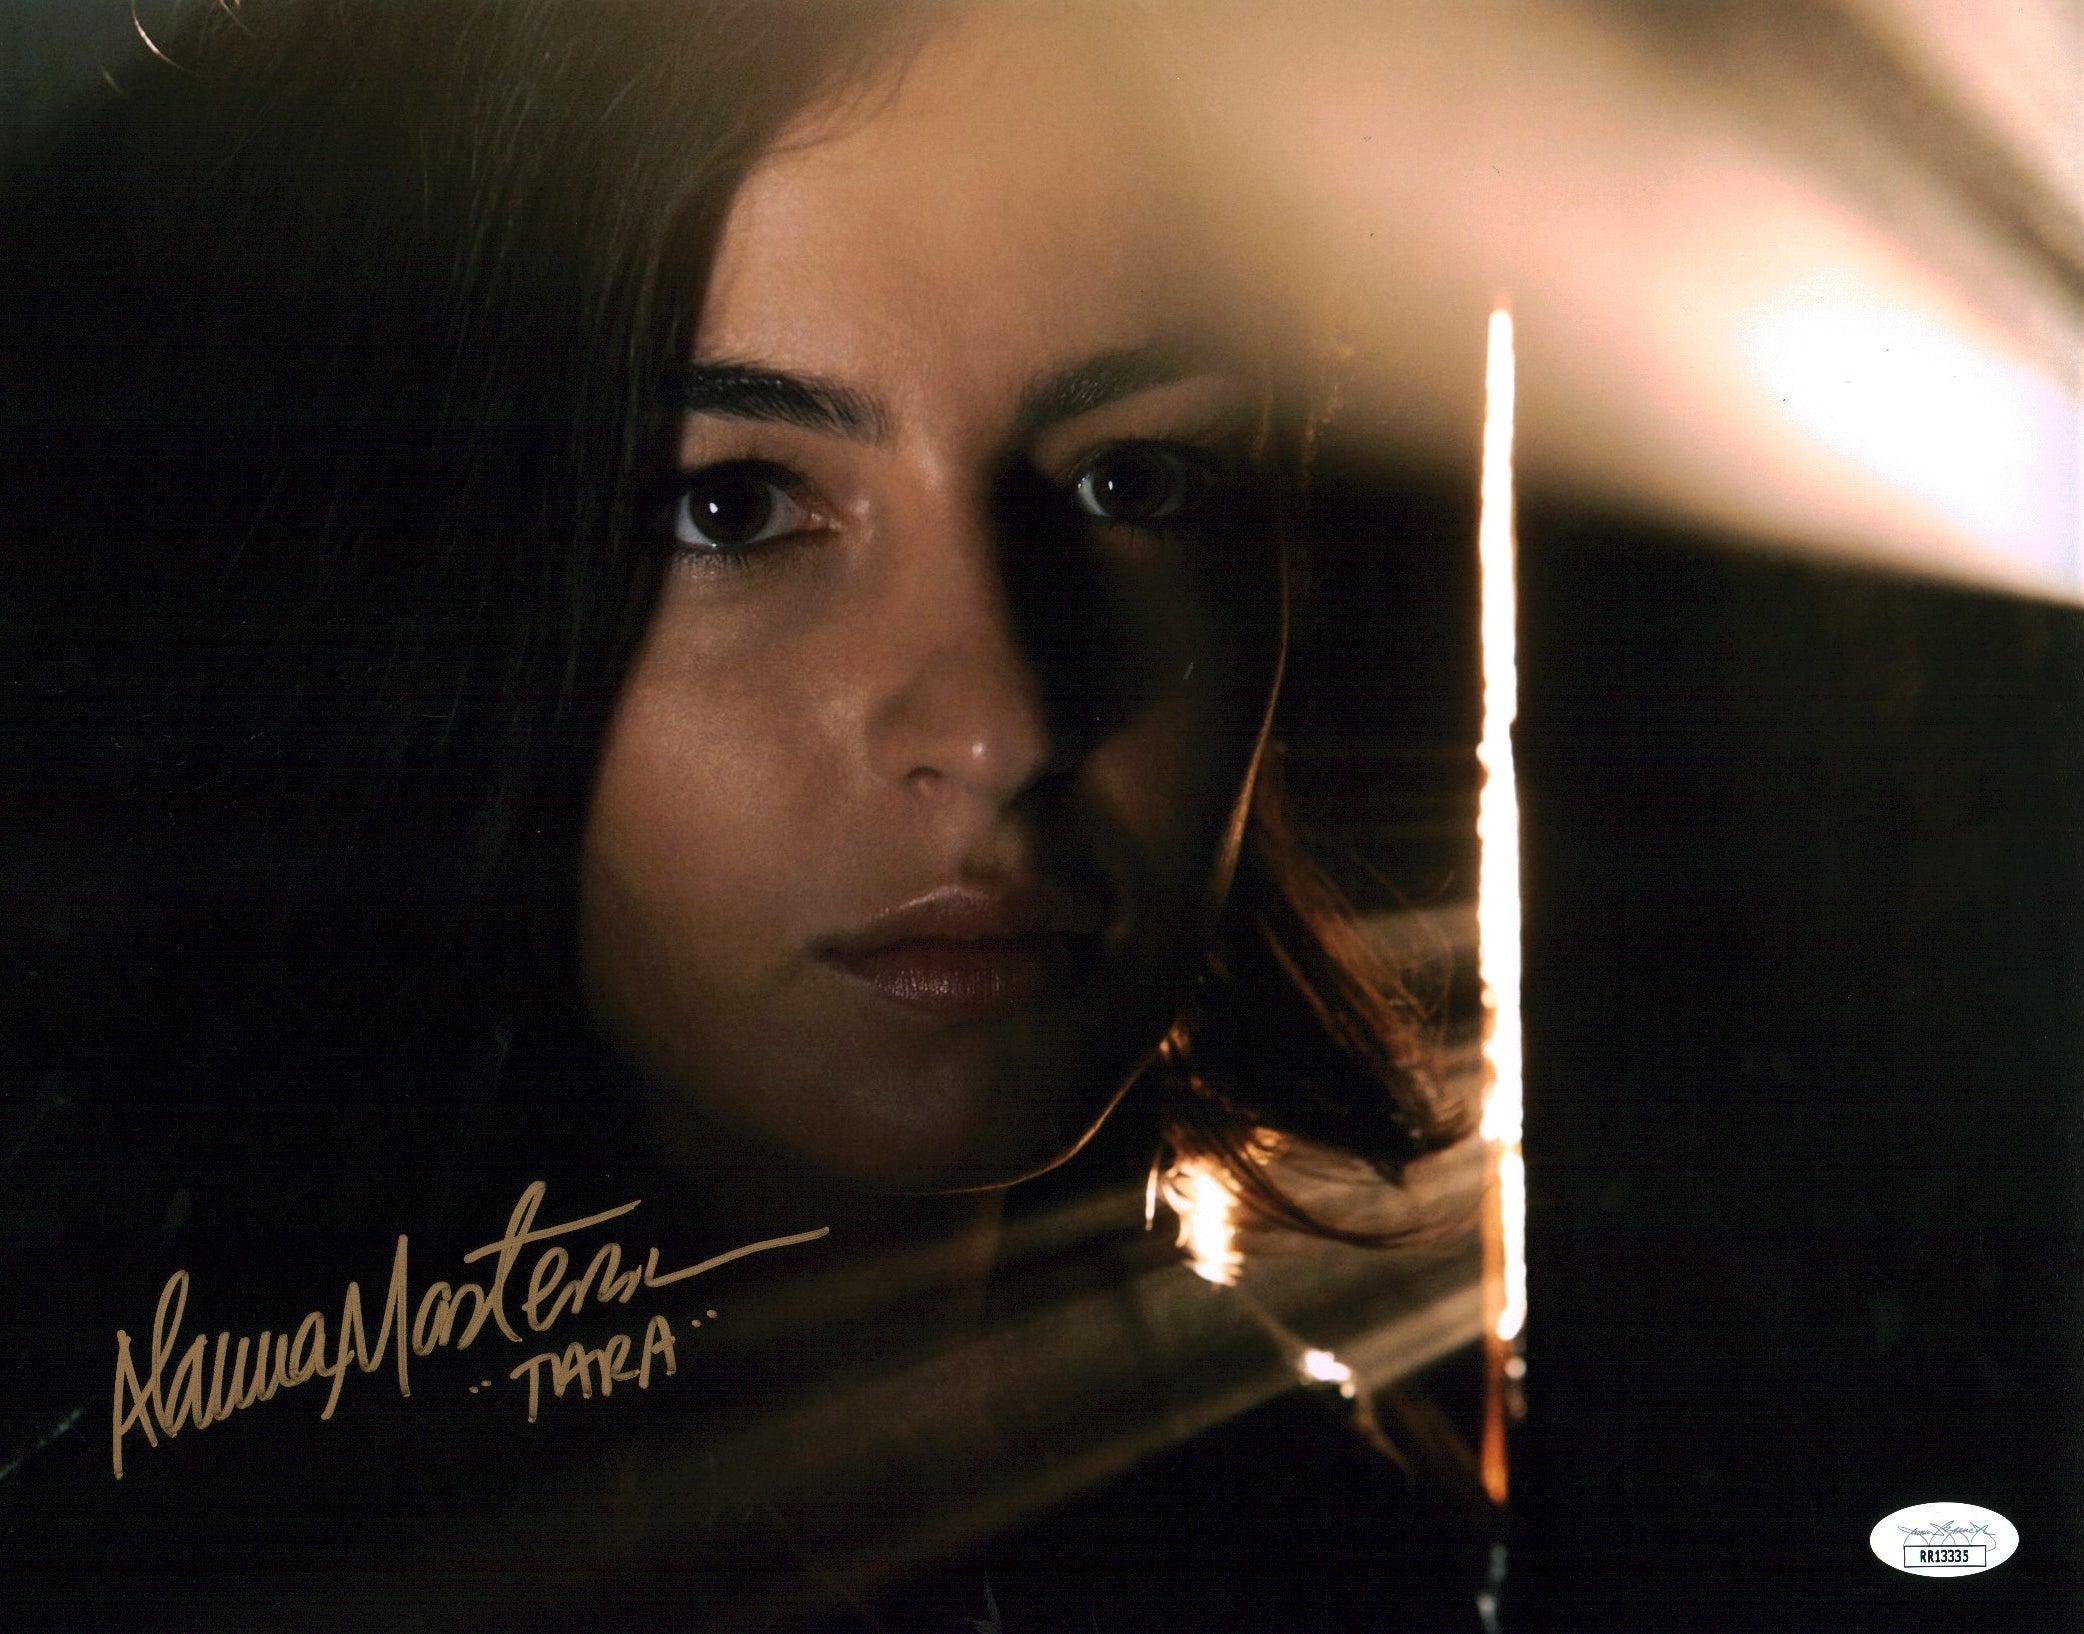 Alanna Masterson The Walking Dead 11x14 Photo Poster Signed Autographed JSA Certified